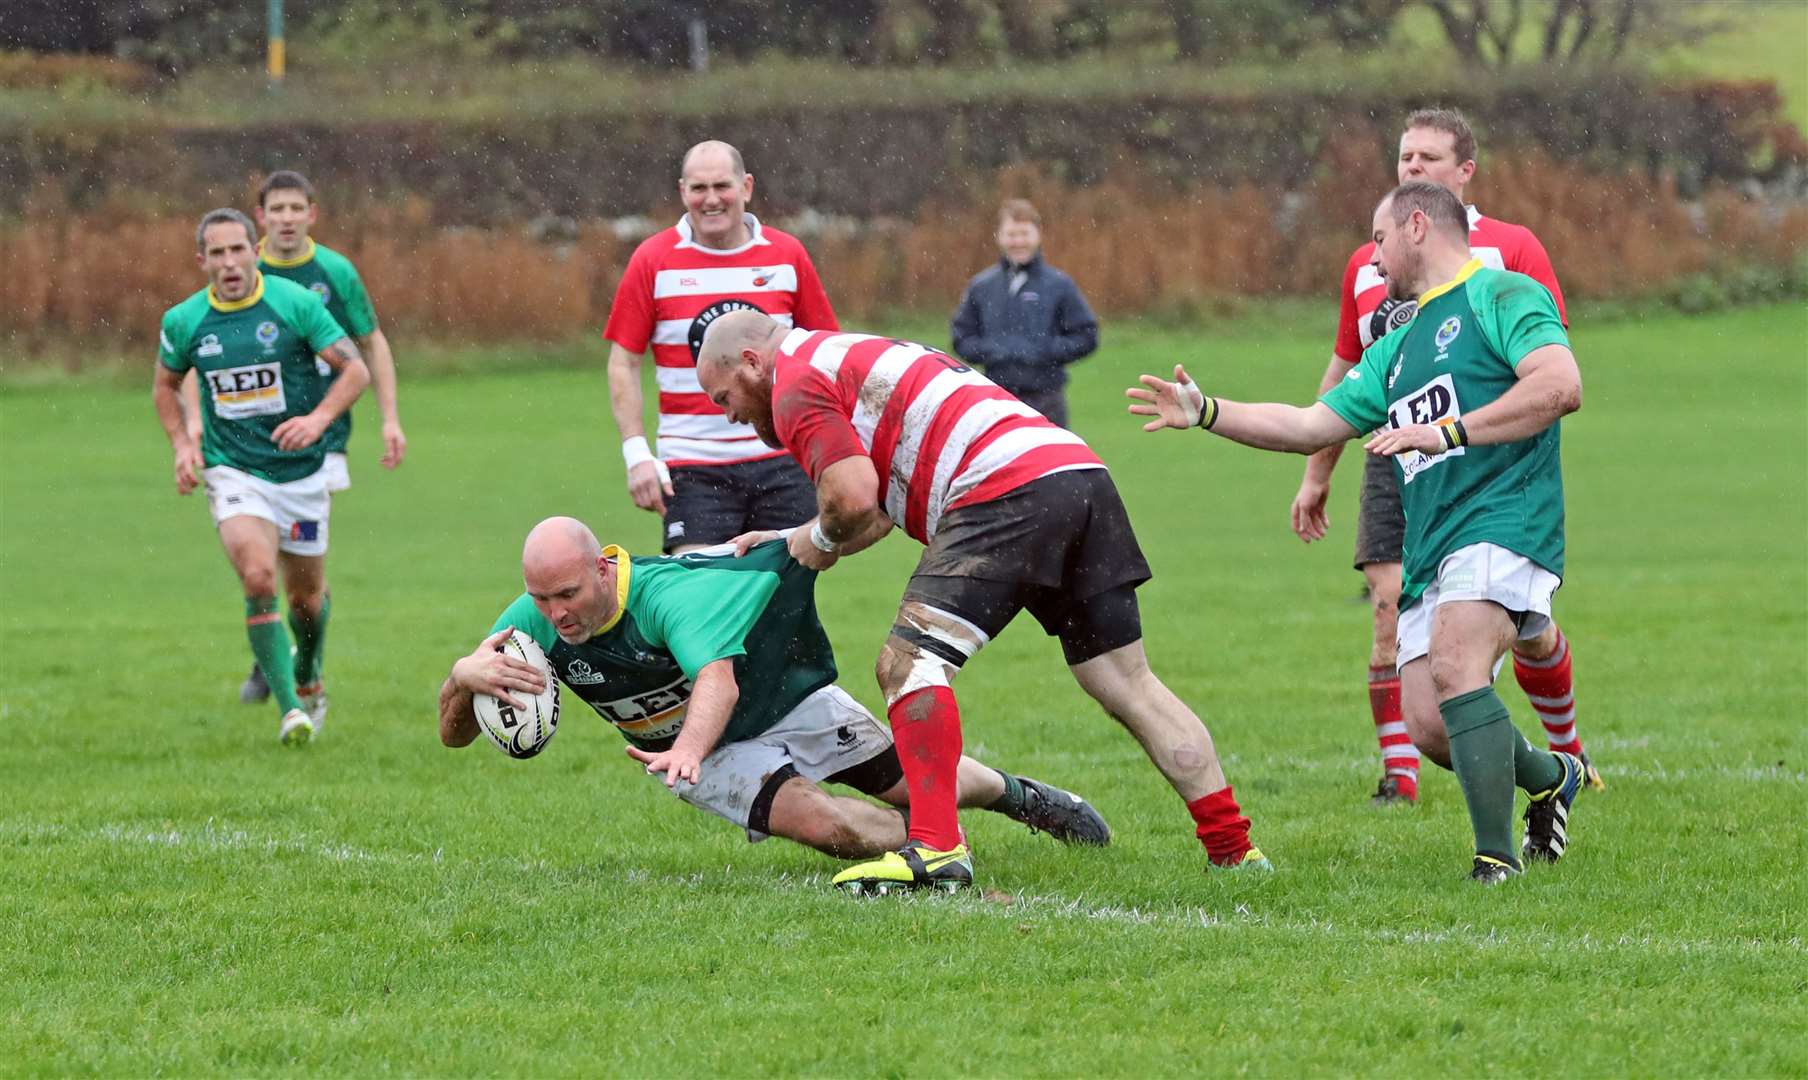 Russell Mill scores the first try for Caithness Evergreens. Picture: James Gunn